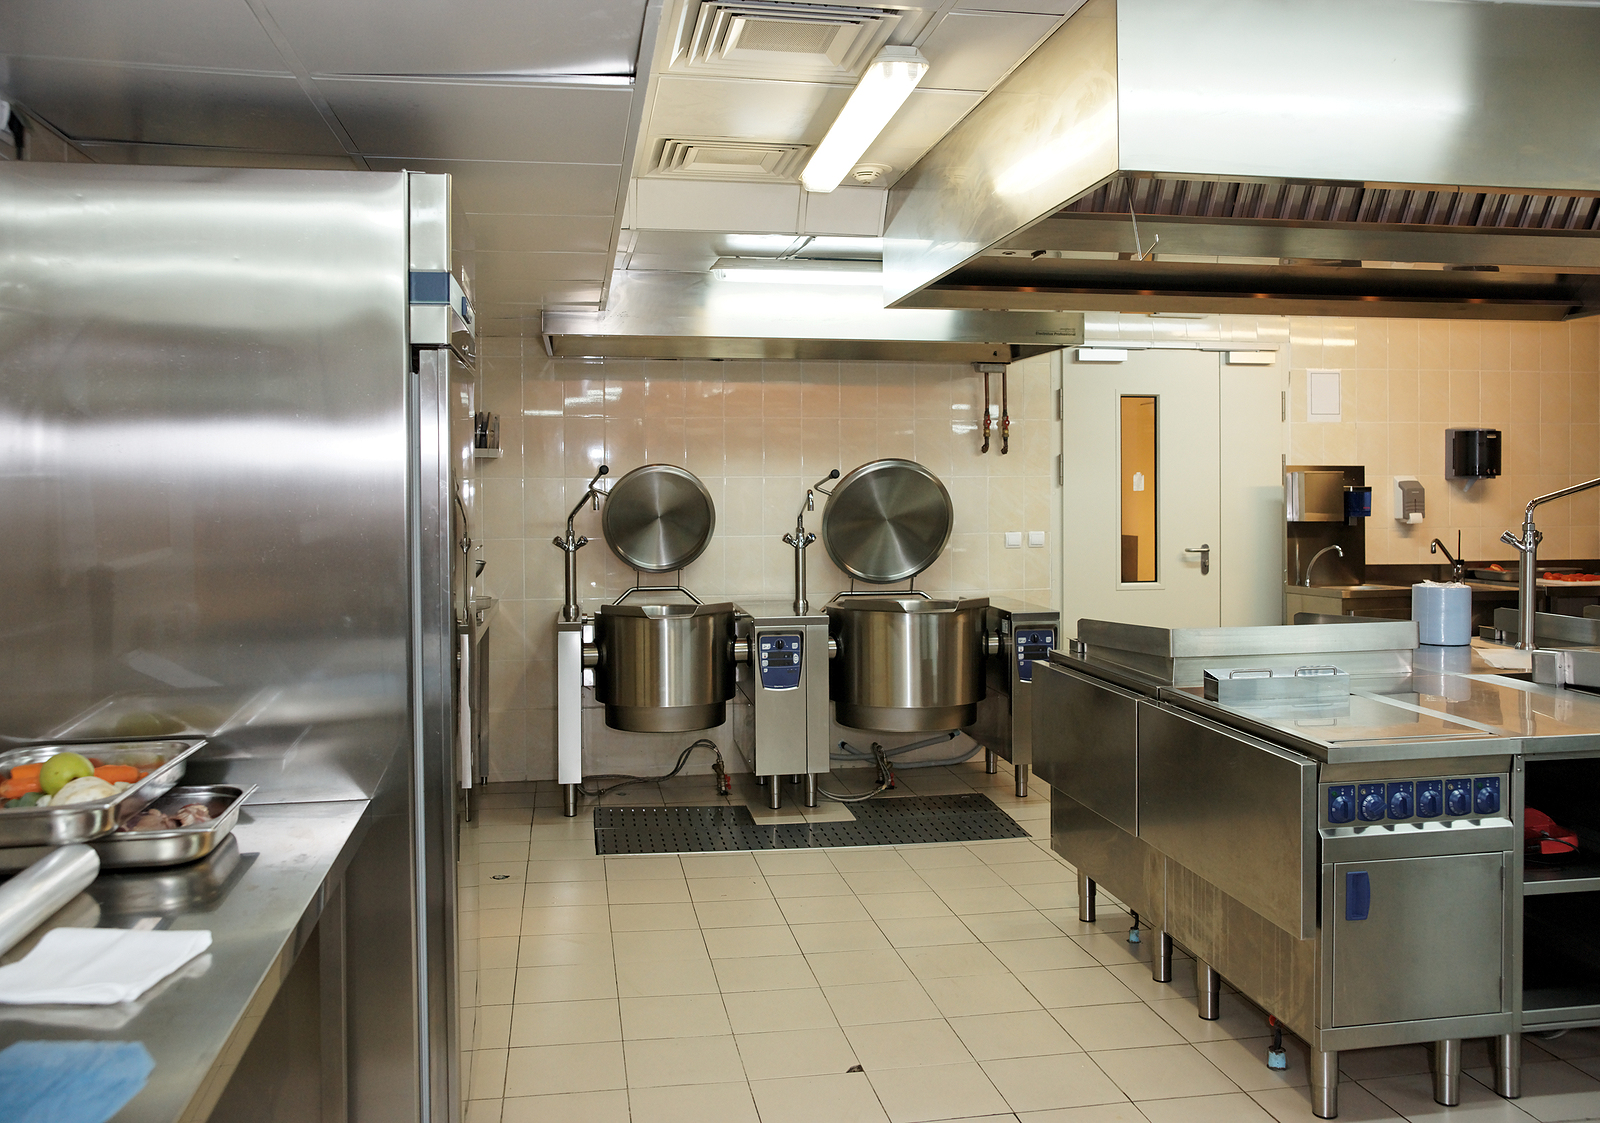 commercial gas installation - Typical kitchen of a restaurant shot in operation